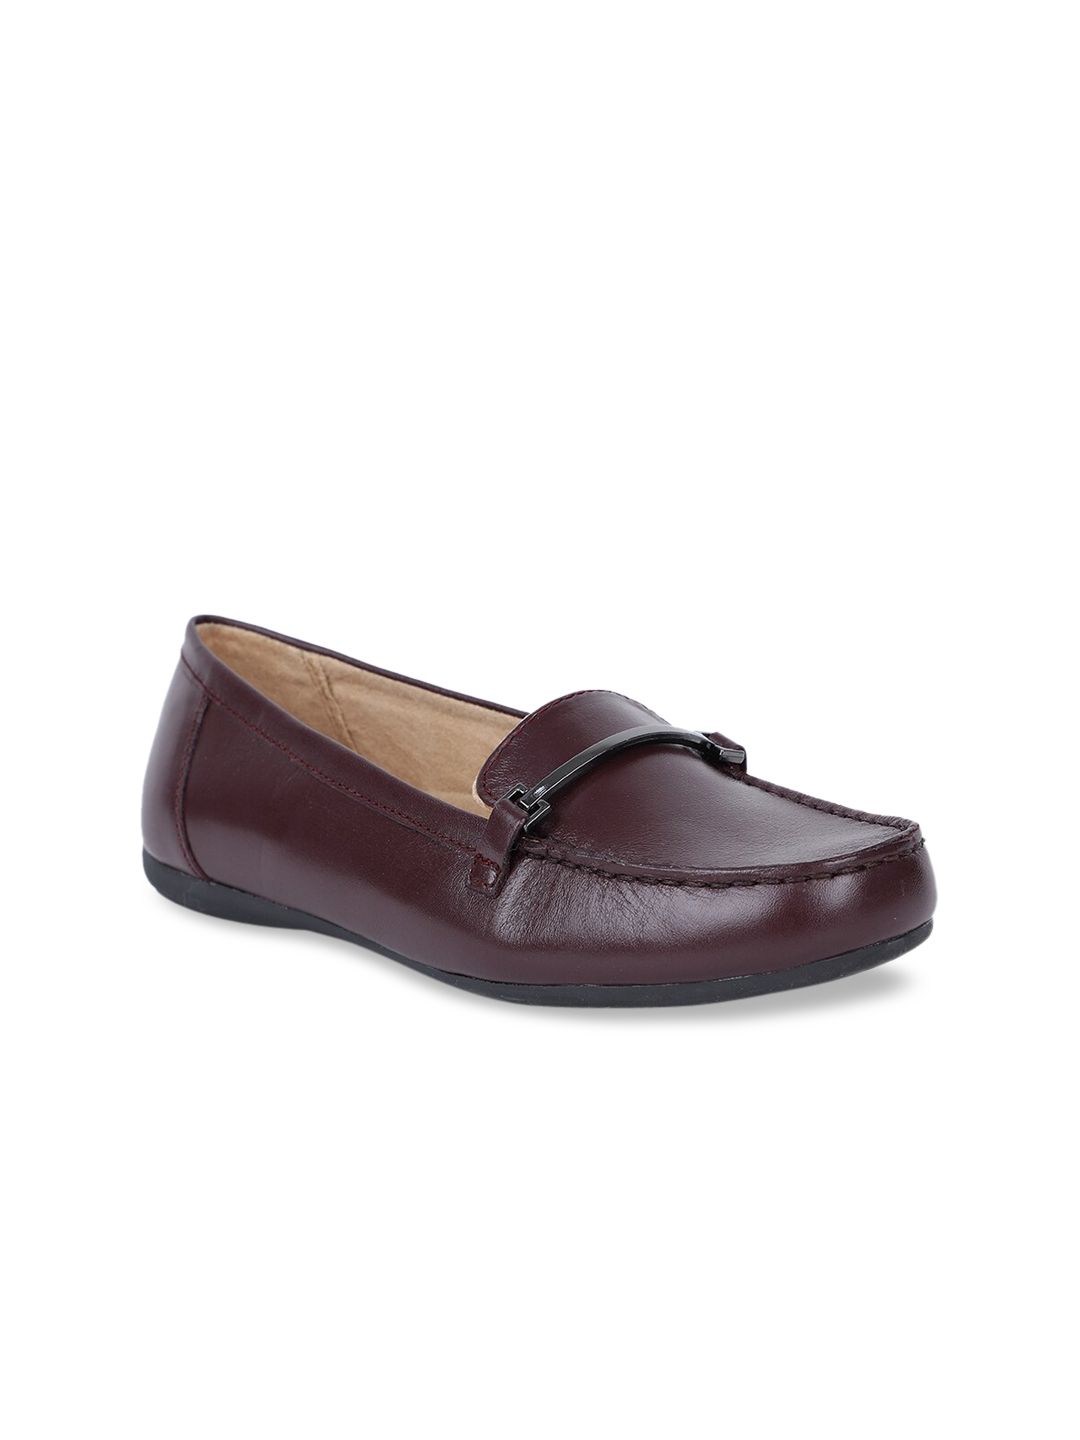 Naturalizer Women Brown Solid Loafers Price in India